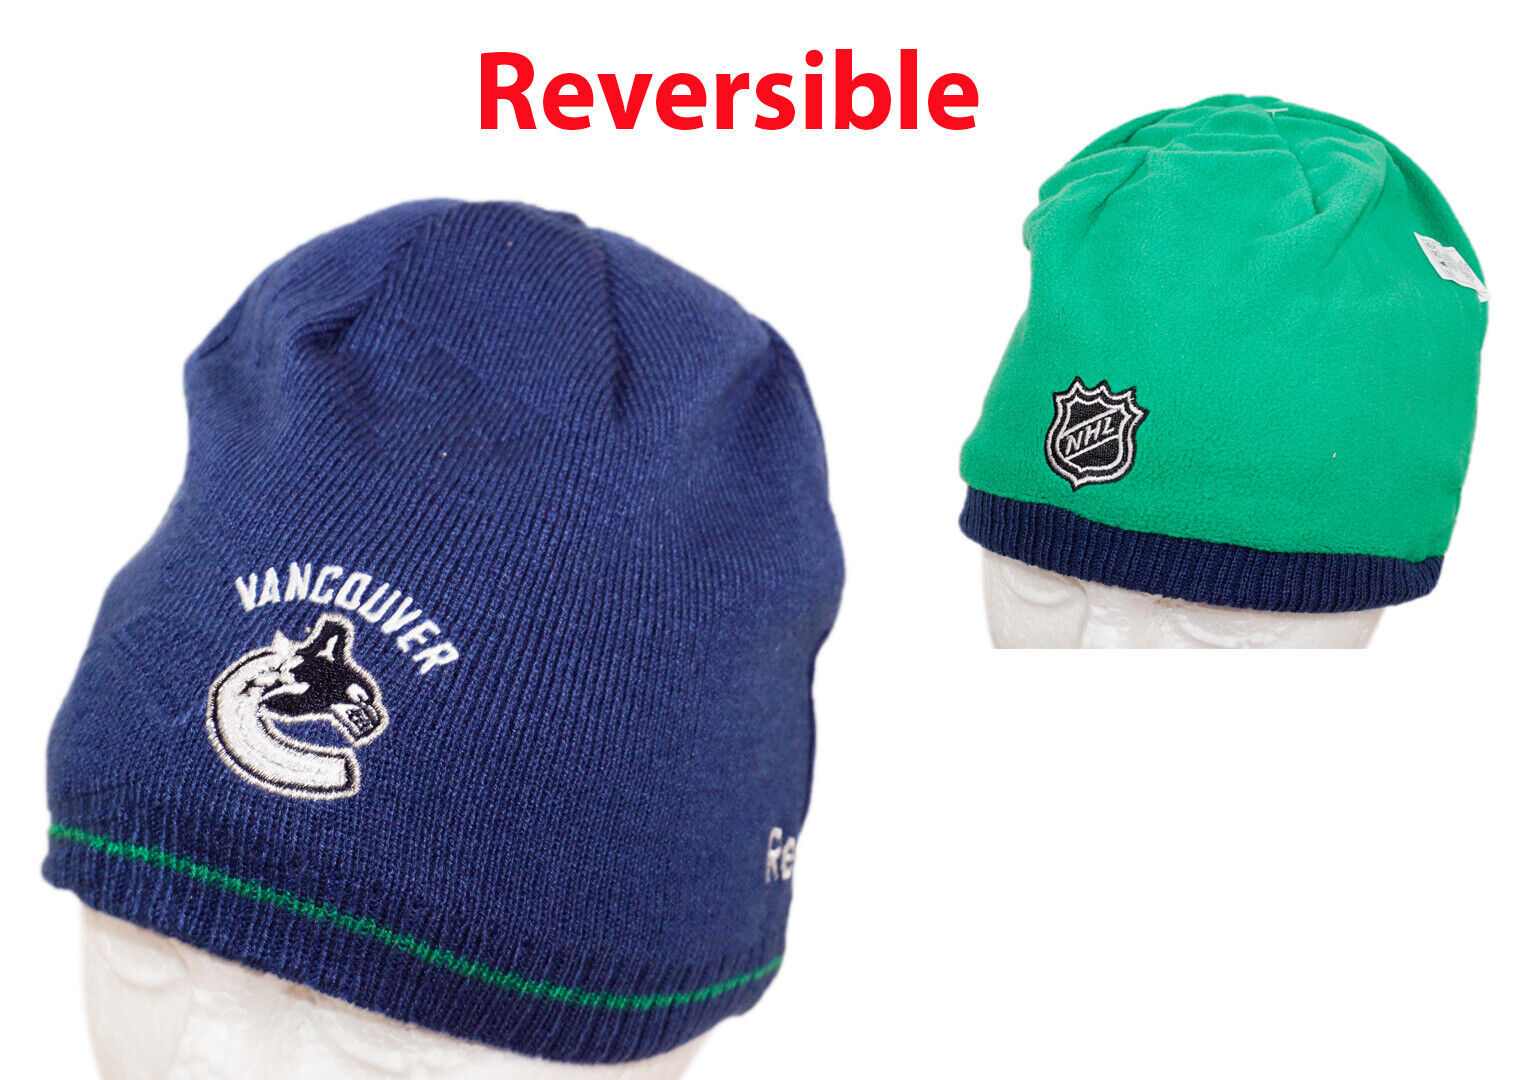 Vancouver Canucks Adult Reversible Beanie Cap - NHL Hockey Fan Toque 2010